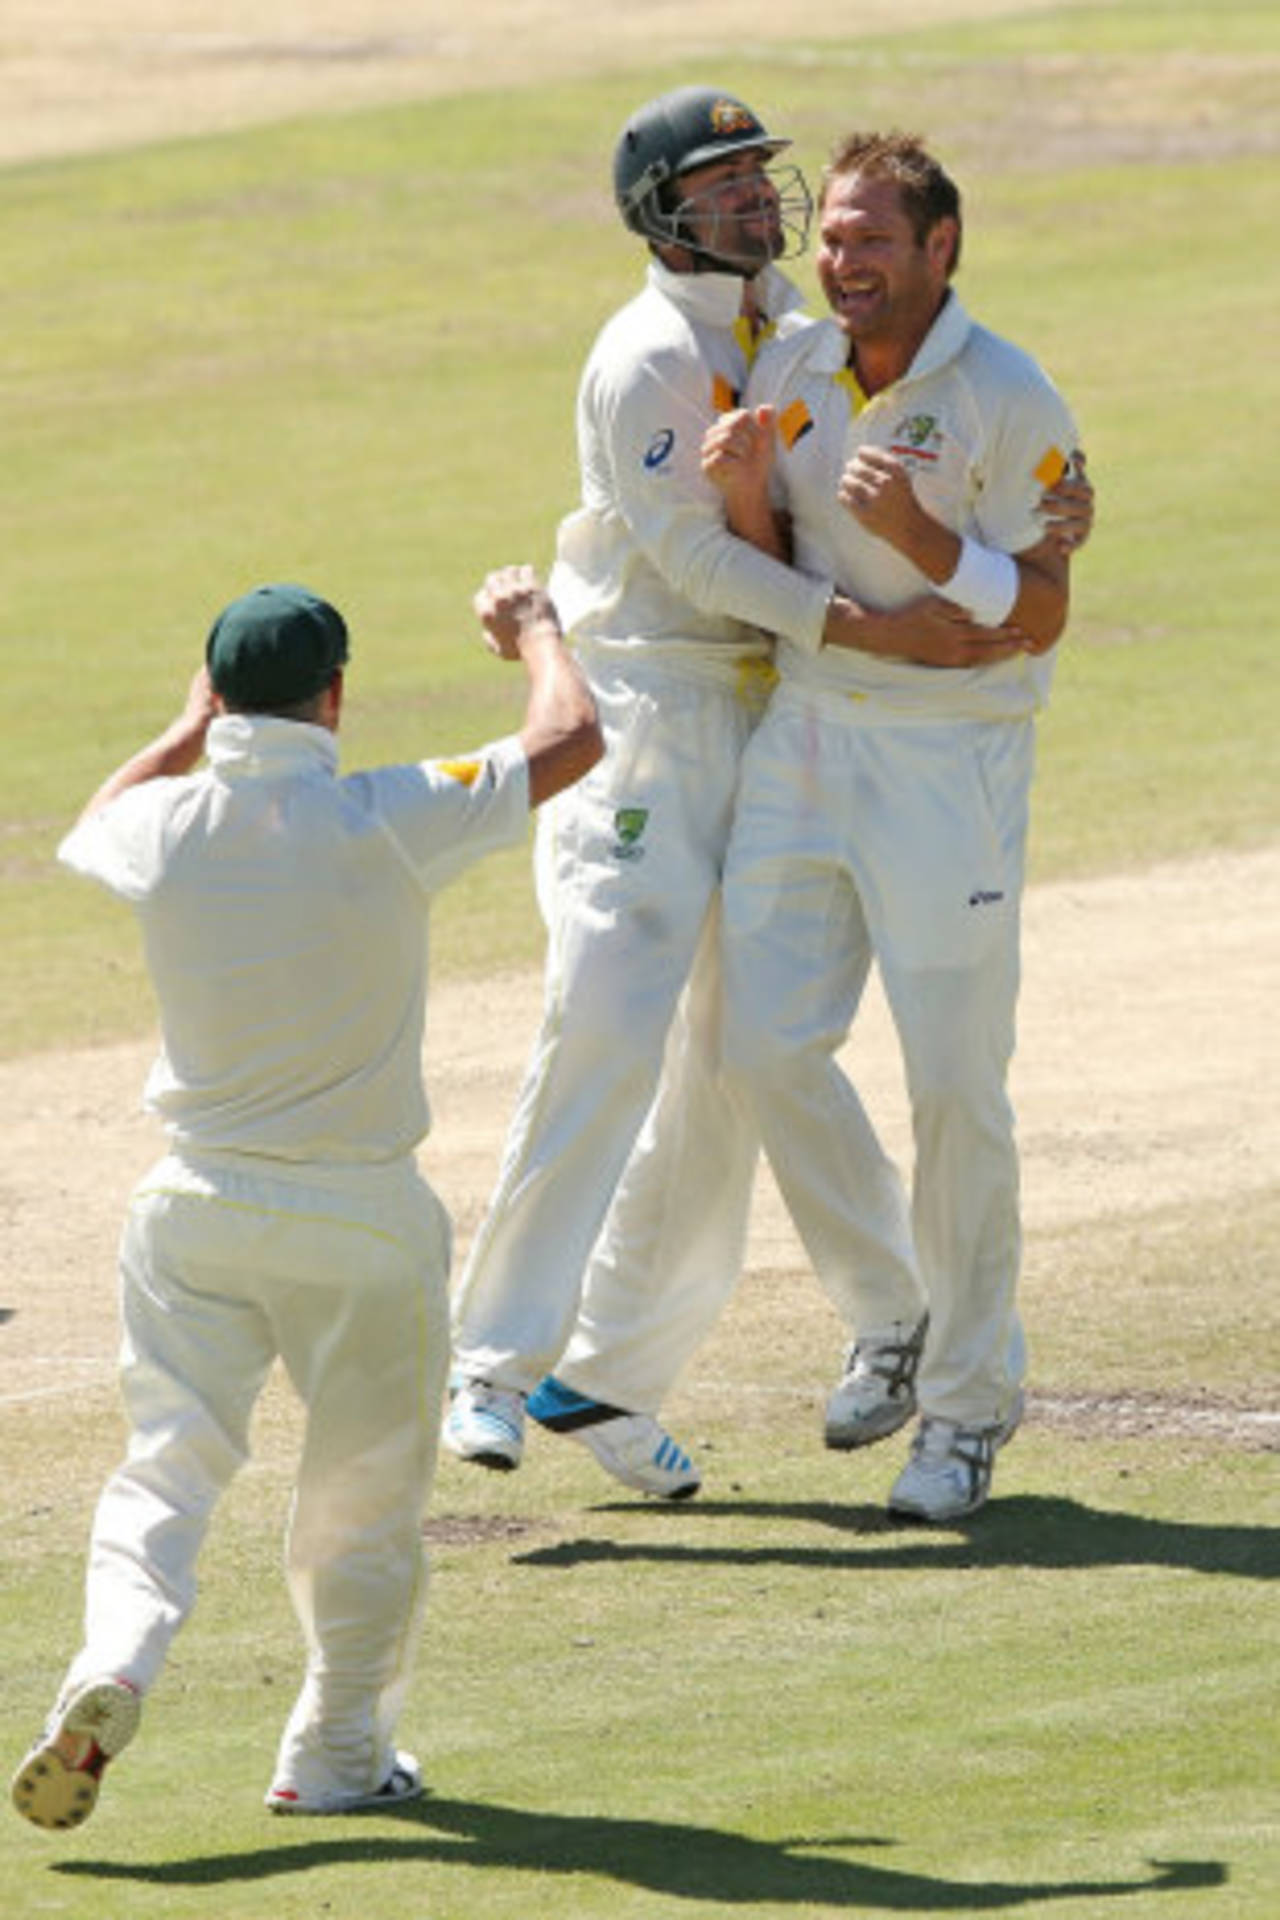 Ryan Harris is congratulated after a wicket, South Africa v Australia, 3rd Test, Cape Town, 4th day, March 4, 2014